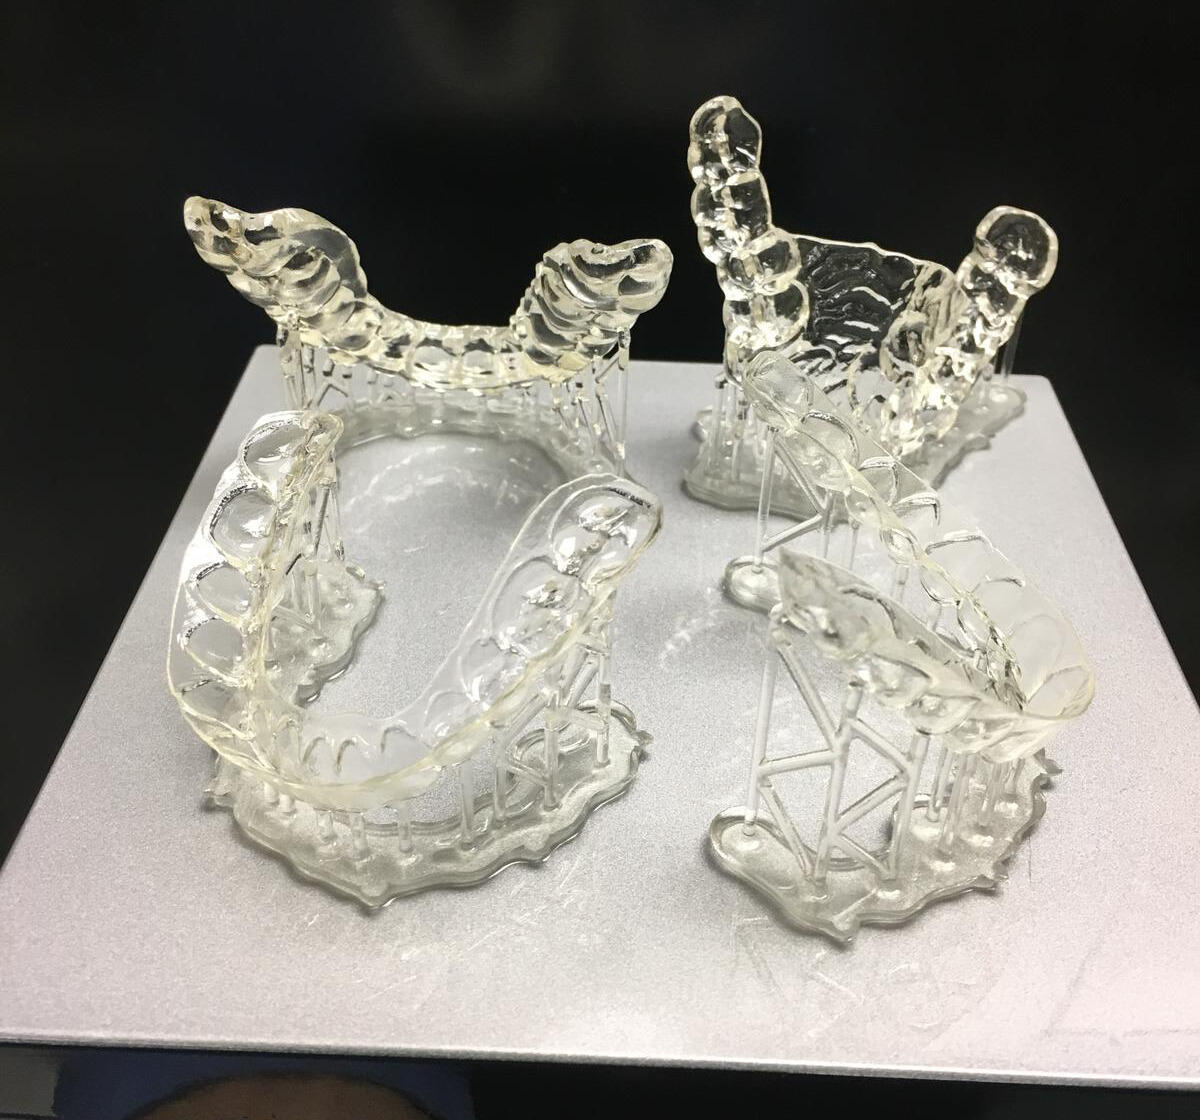 3-D printed mouth guards.